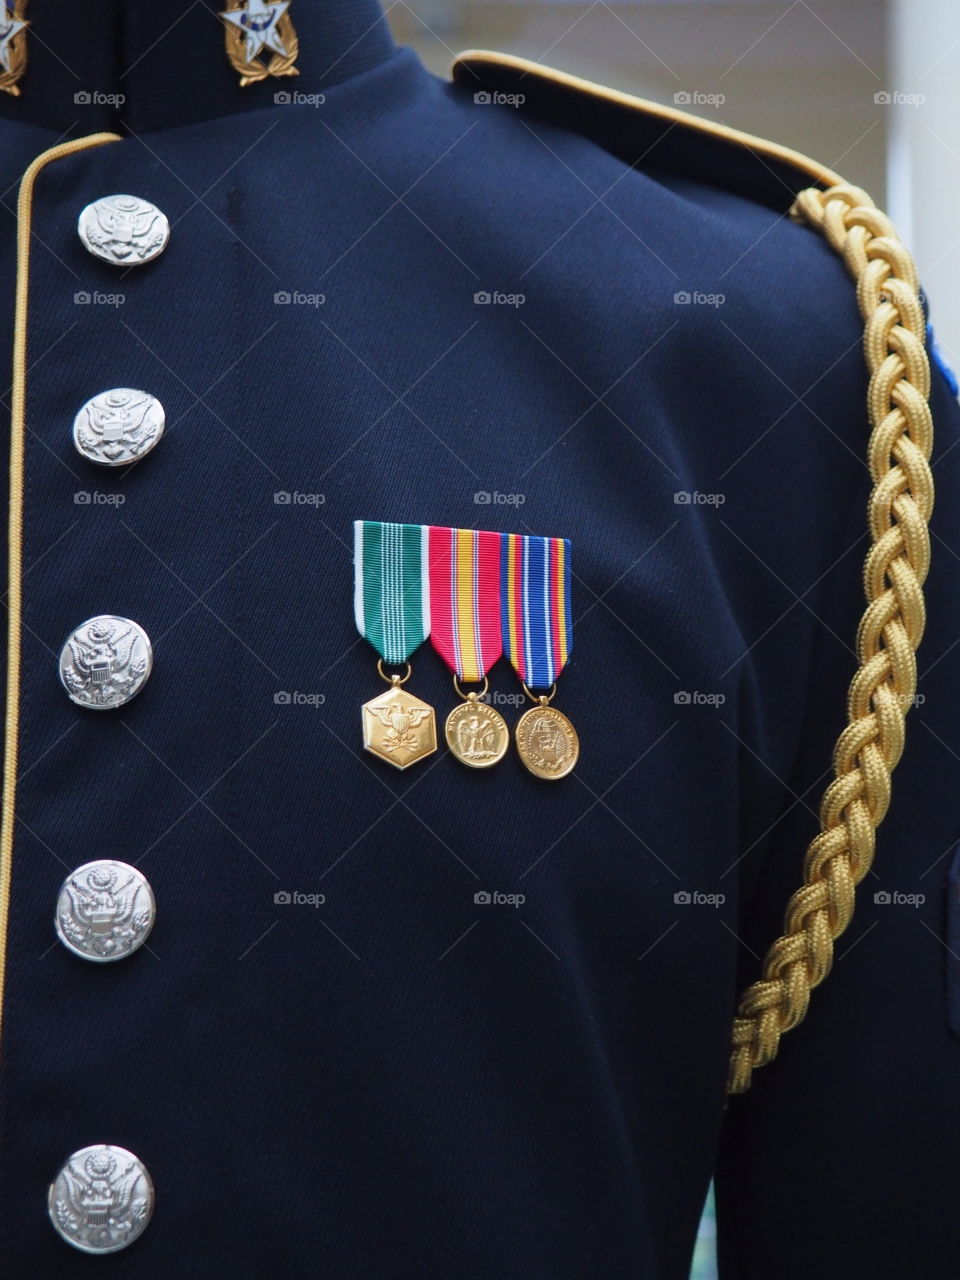 Soldier. Military rank officer medals uniform USA